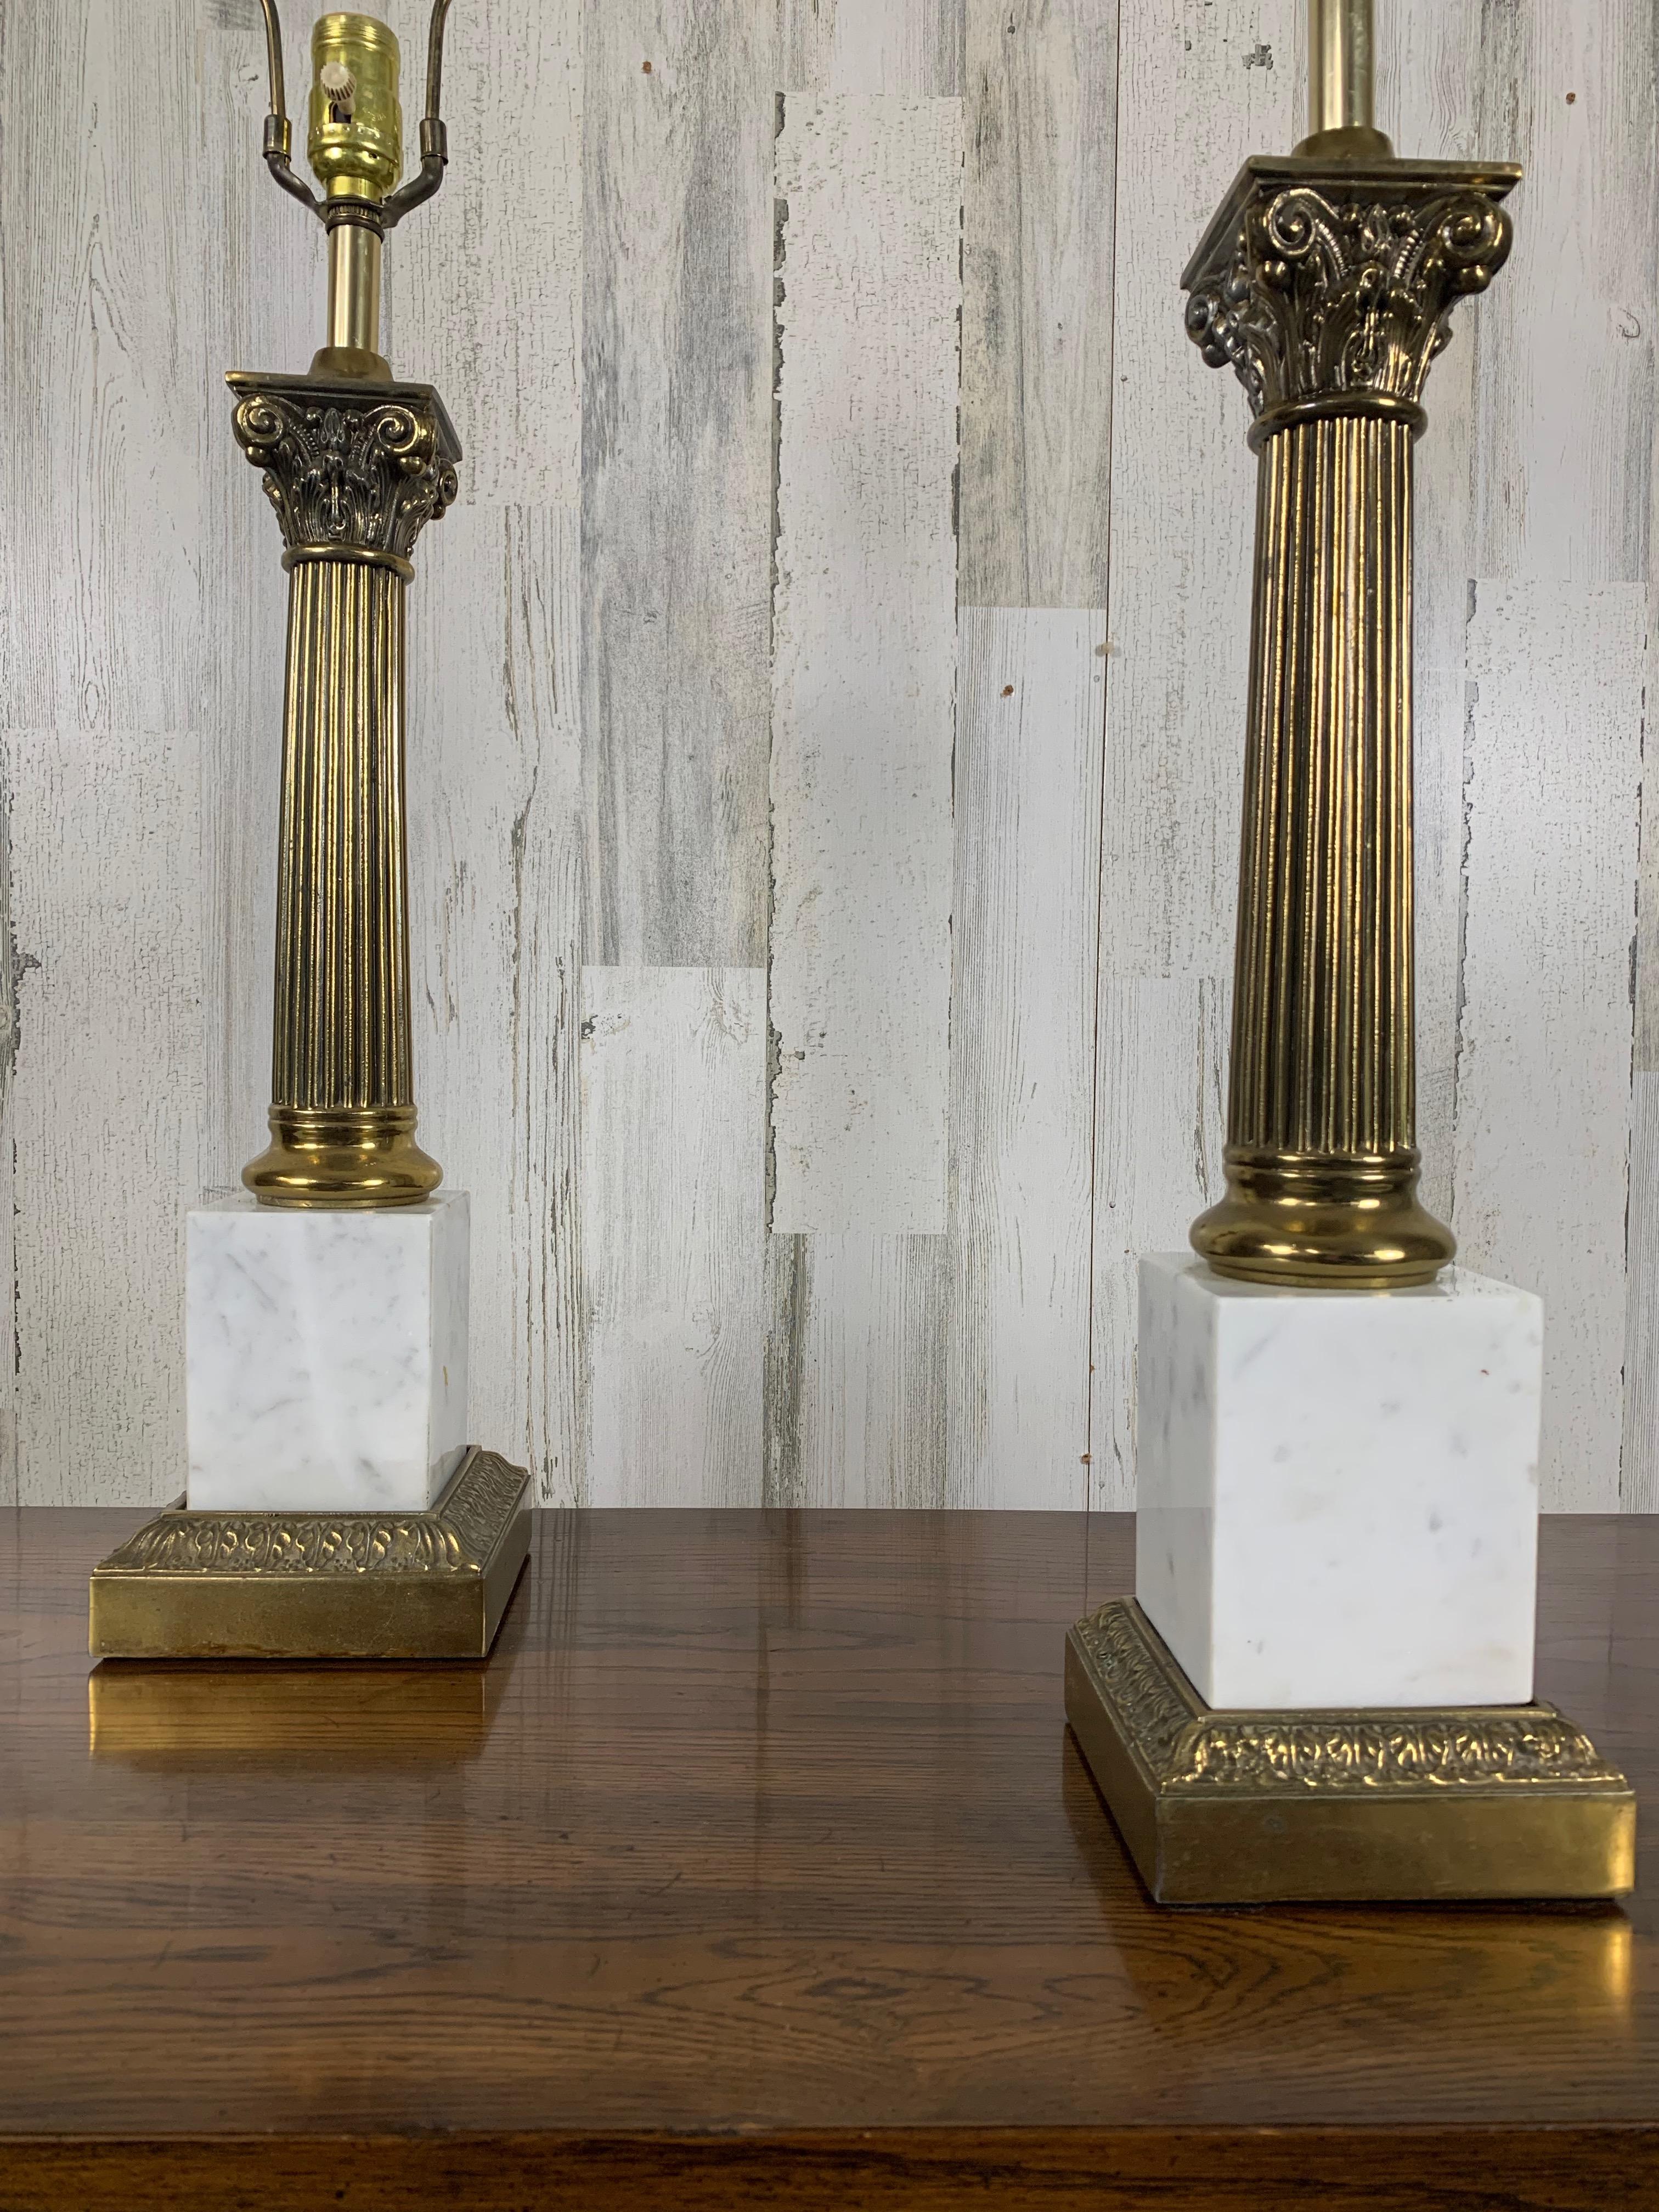 Pair of classical style Table lamps consisting of fluted brass columns with Corinthian capitals and white marble plinth. perfect for that library or living room.
Made by Westwood Industries. The pleated shades are not included. 
31.75